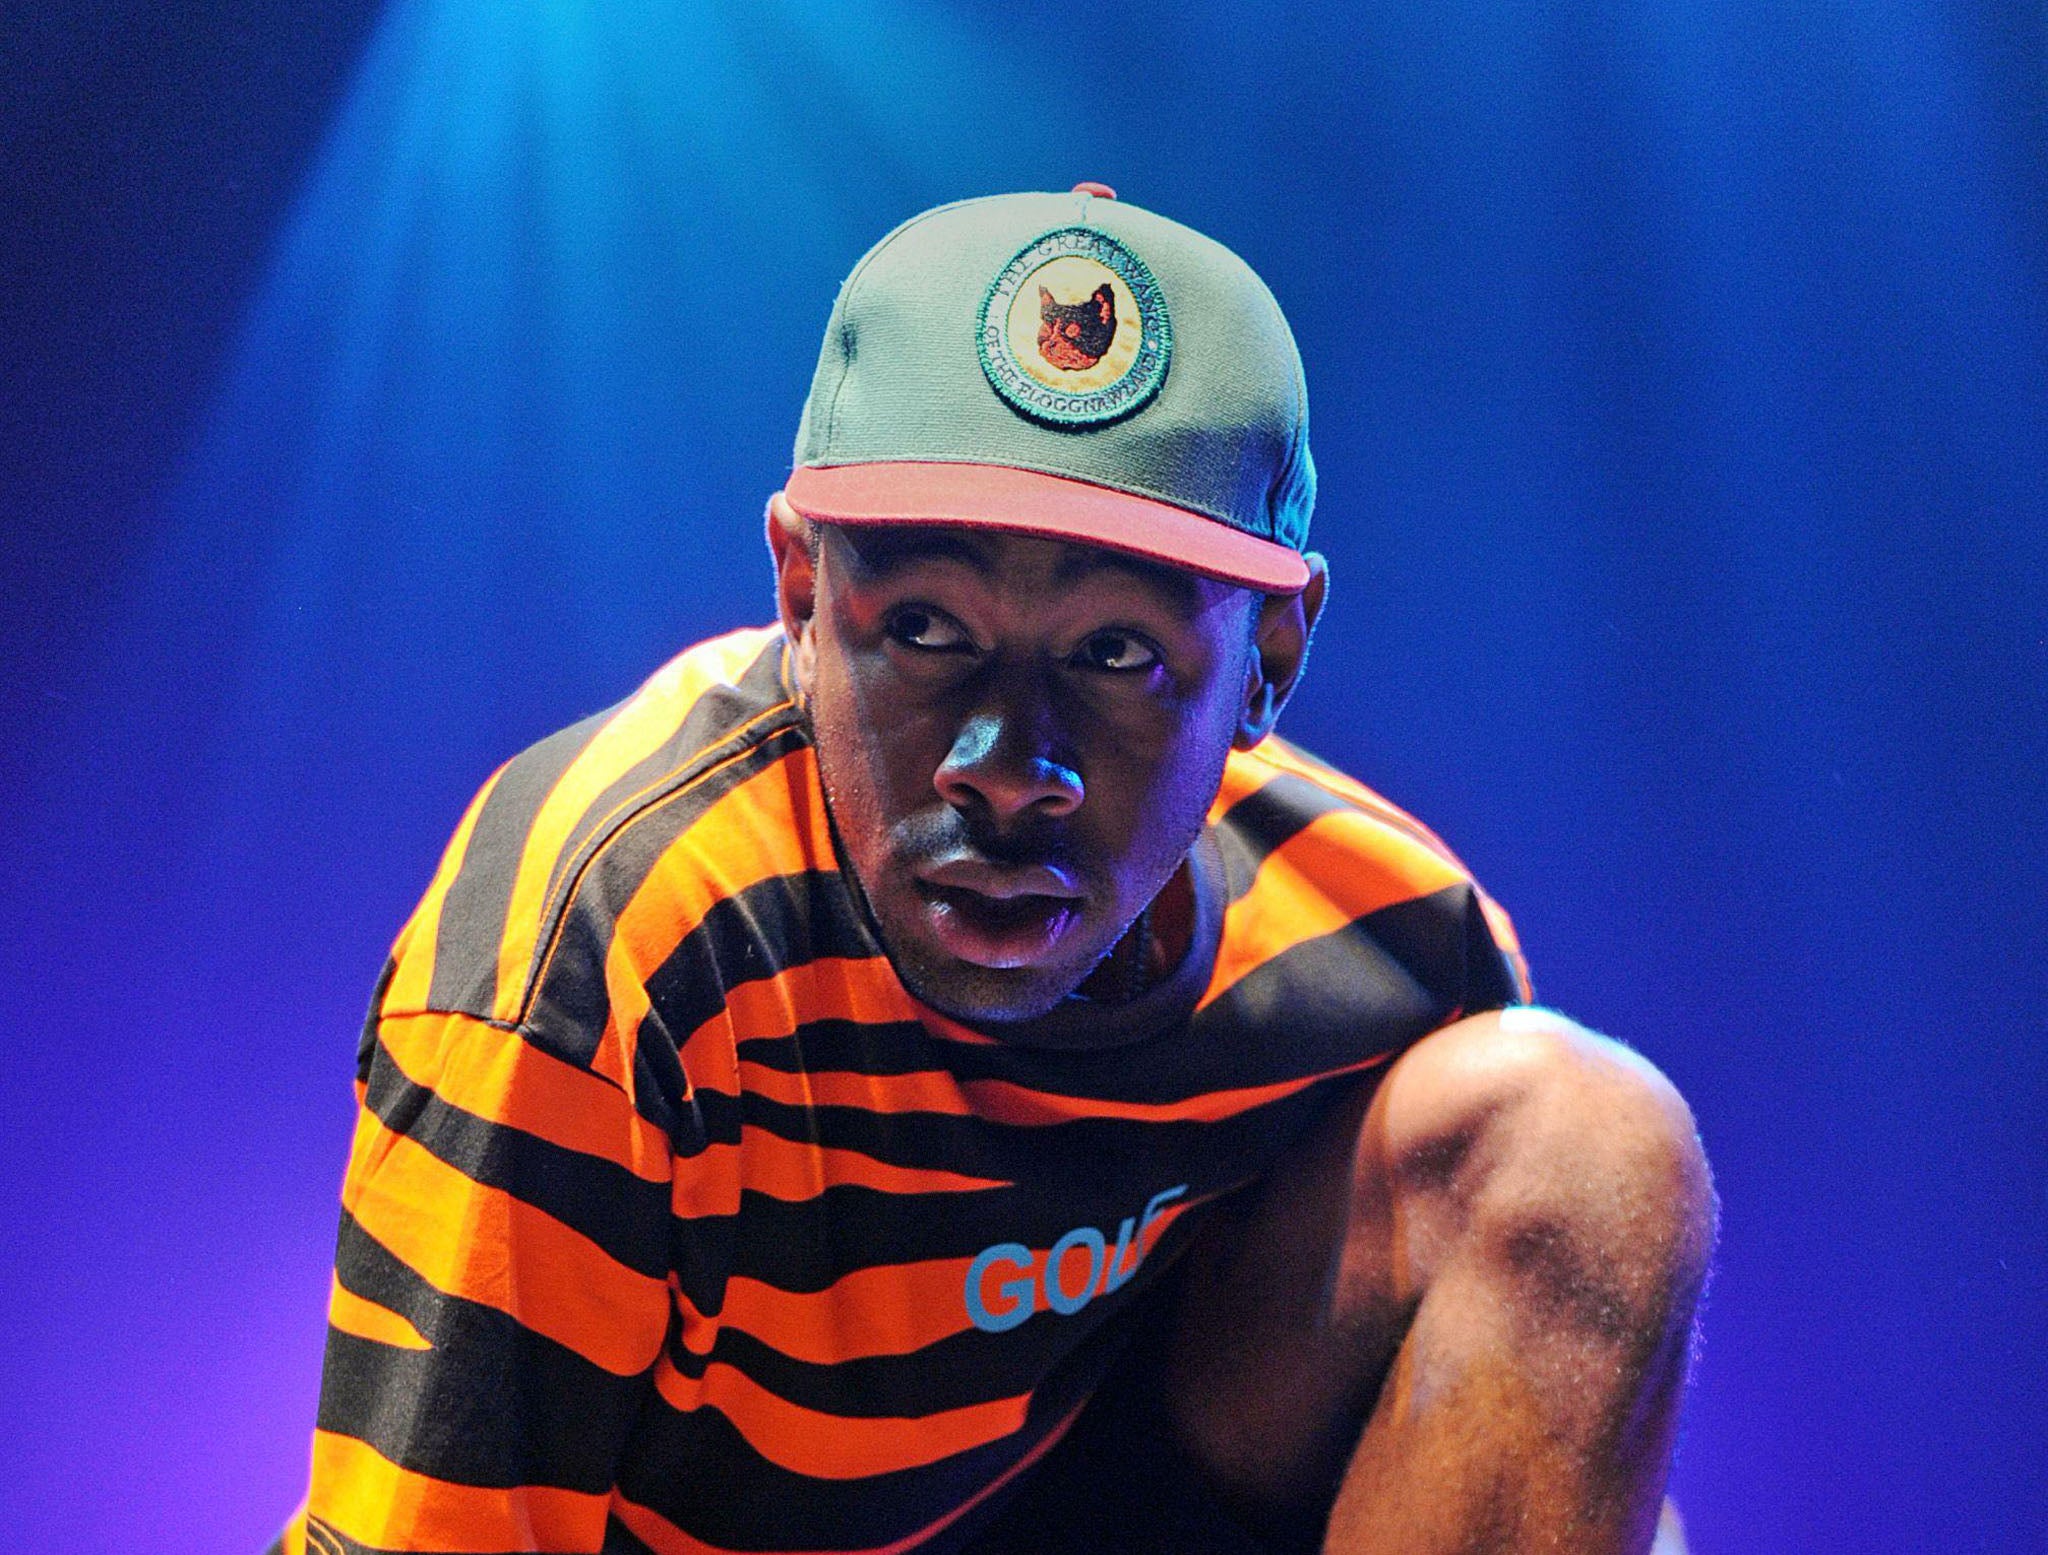 Frank Ocean & Tyler the Creator Go For a Bike Ride Together: Photo